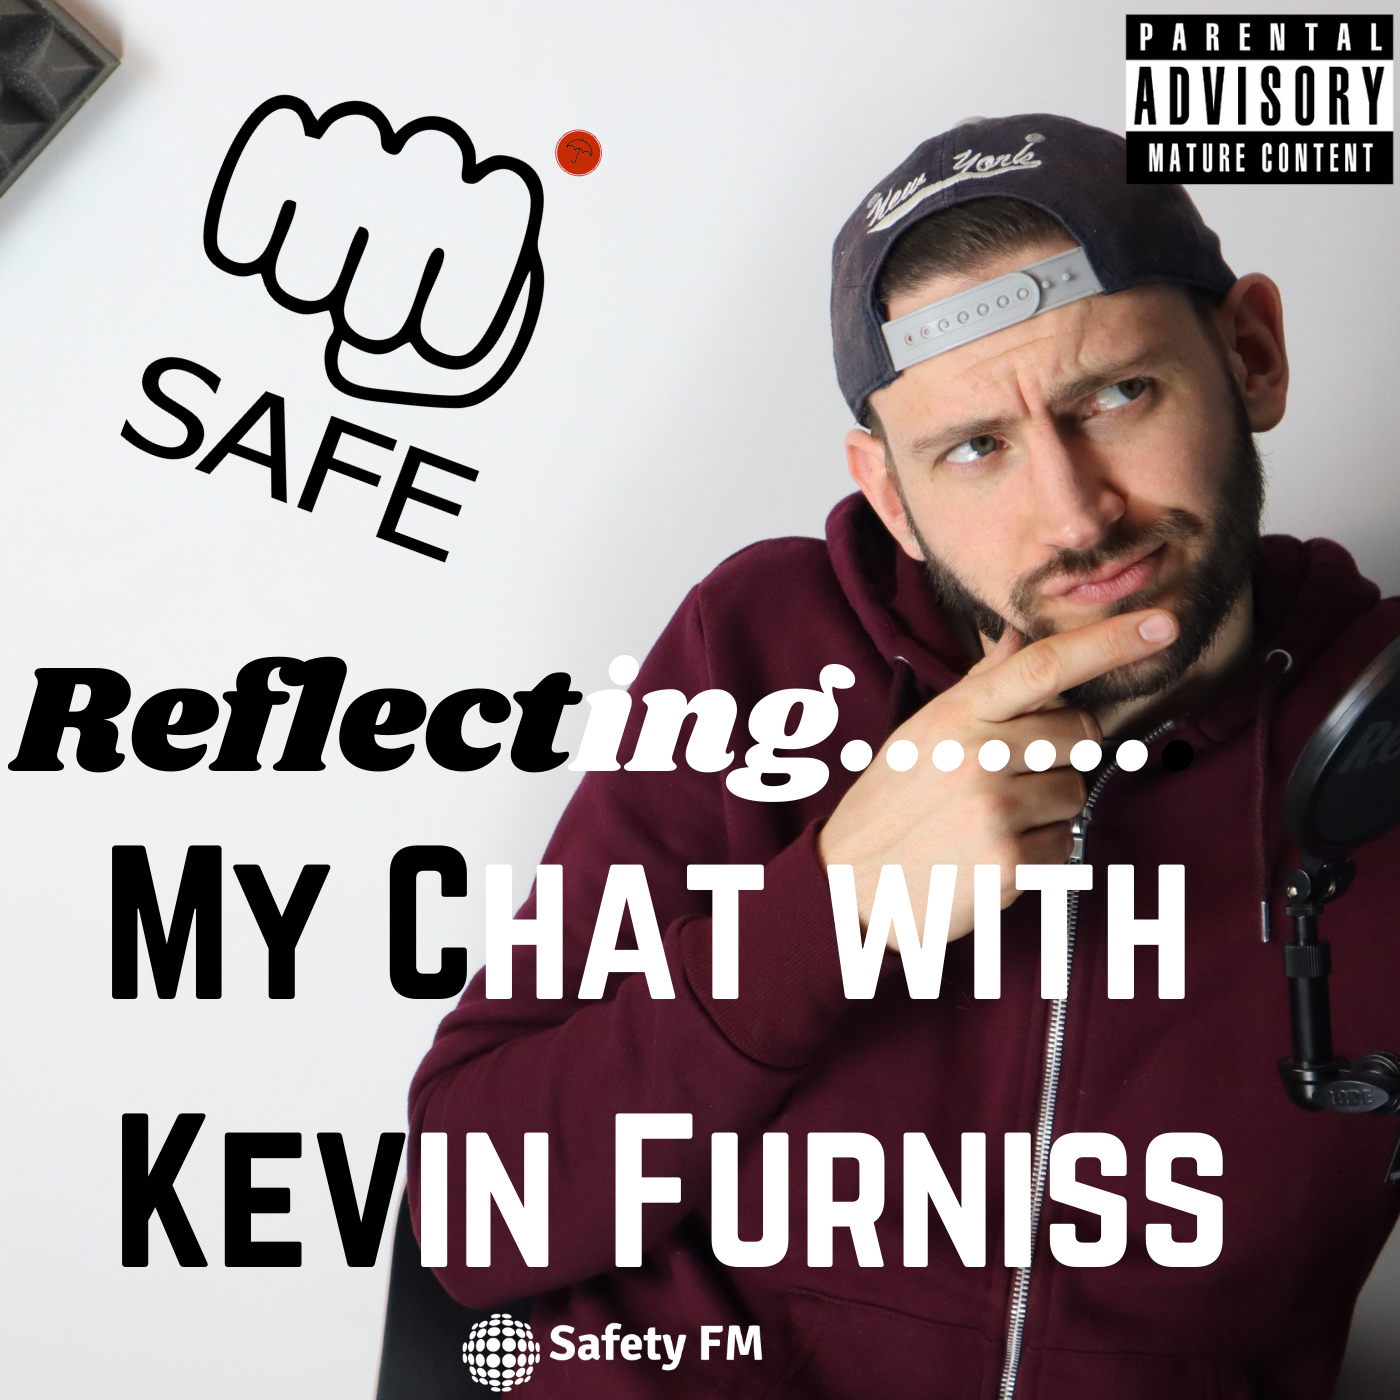 Reflecting on my chat with Kevin Furniss